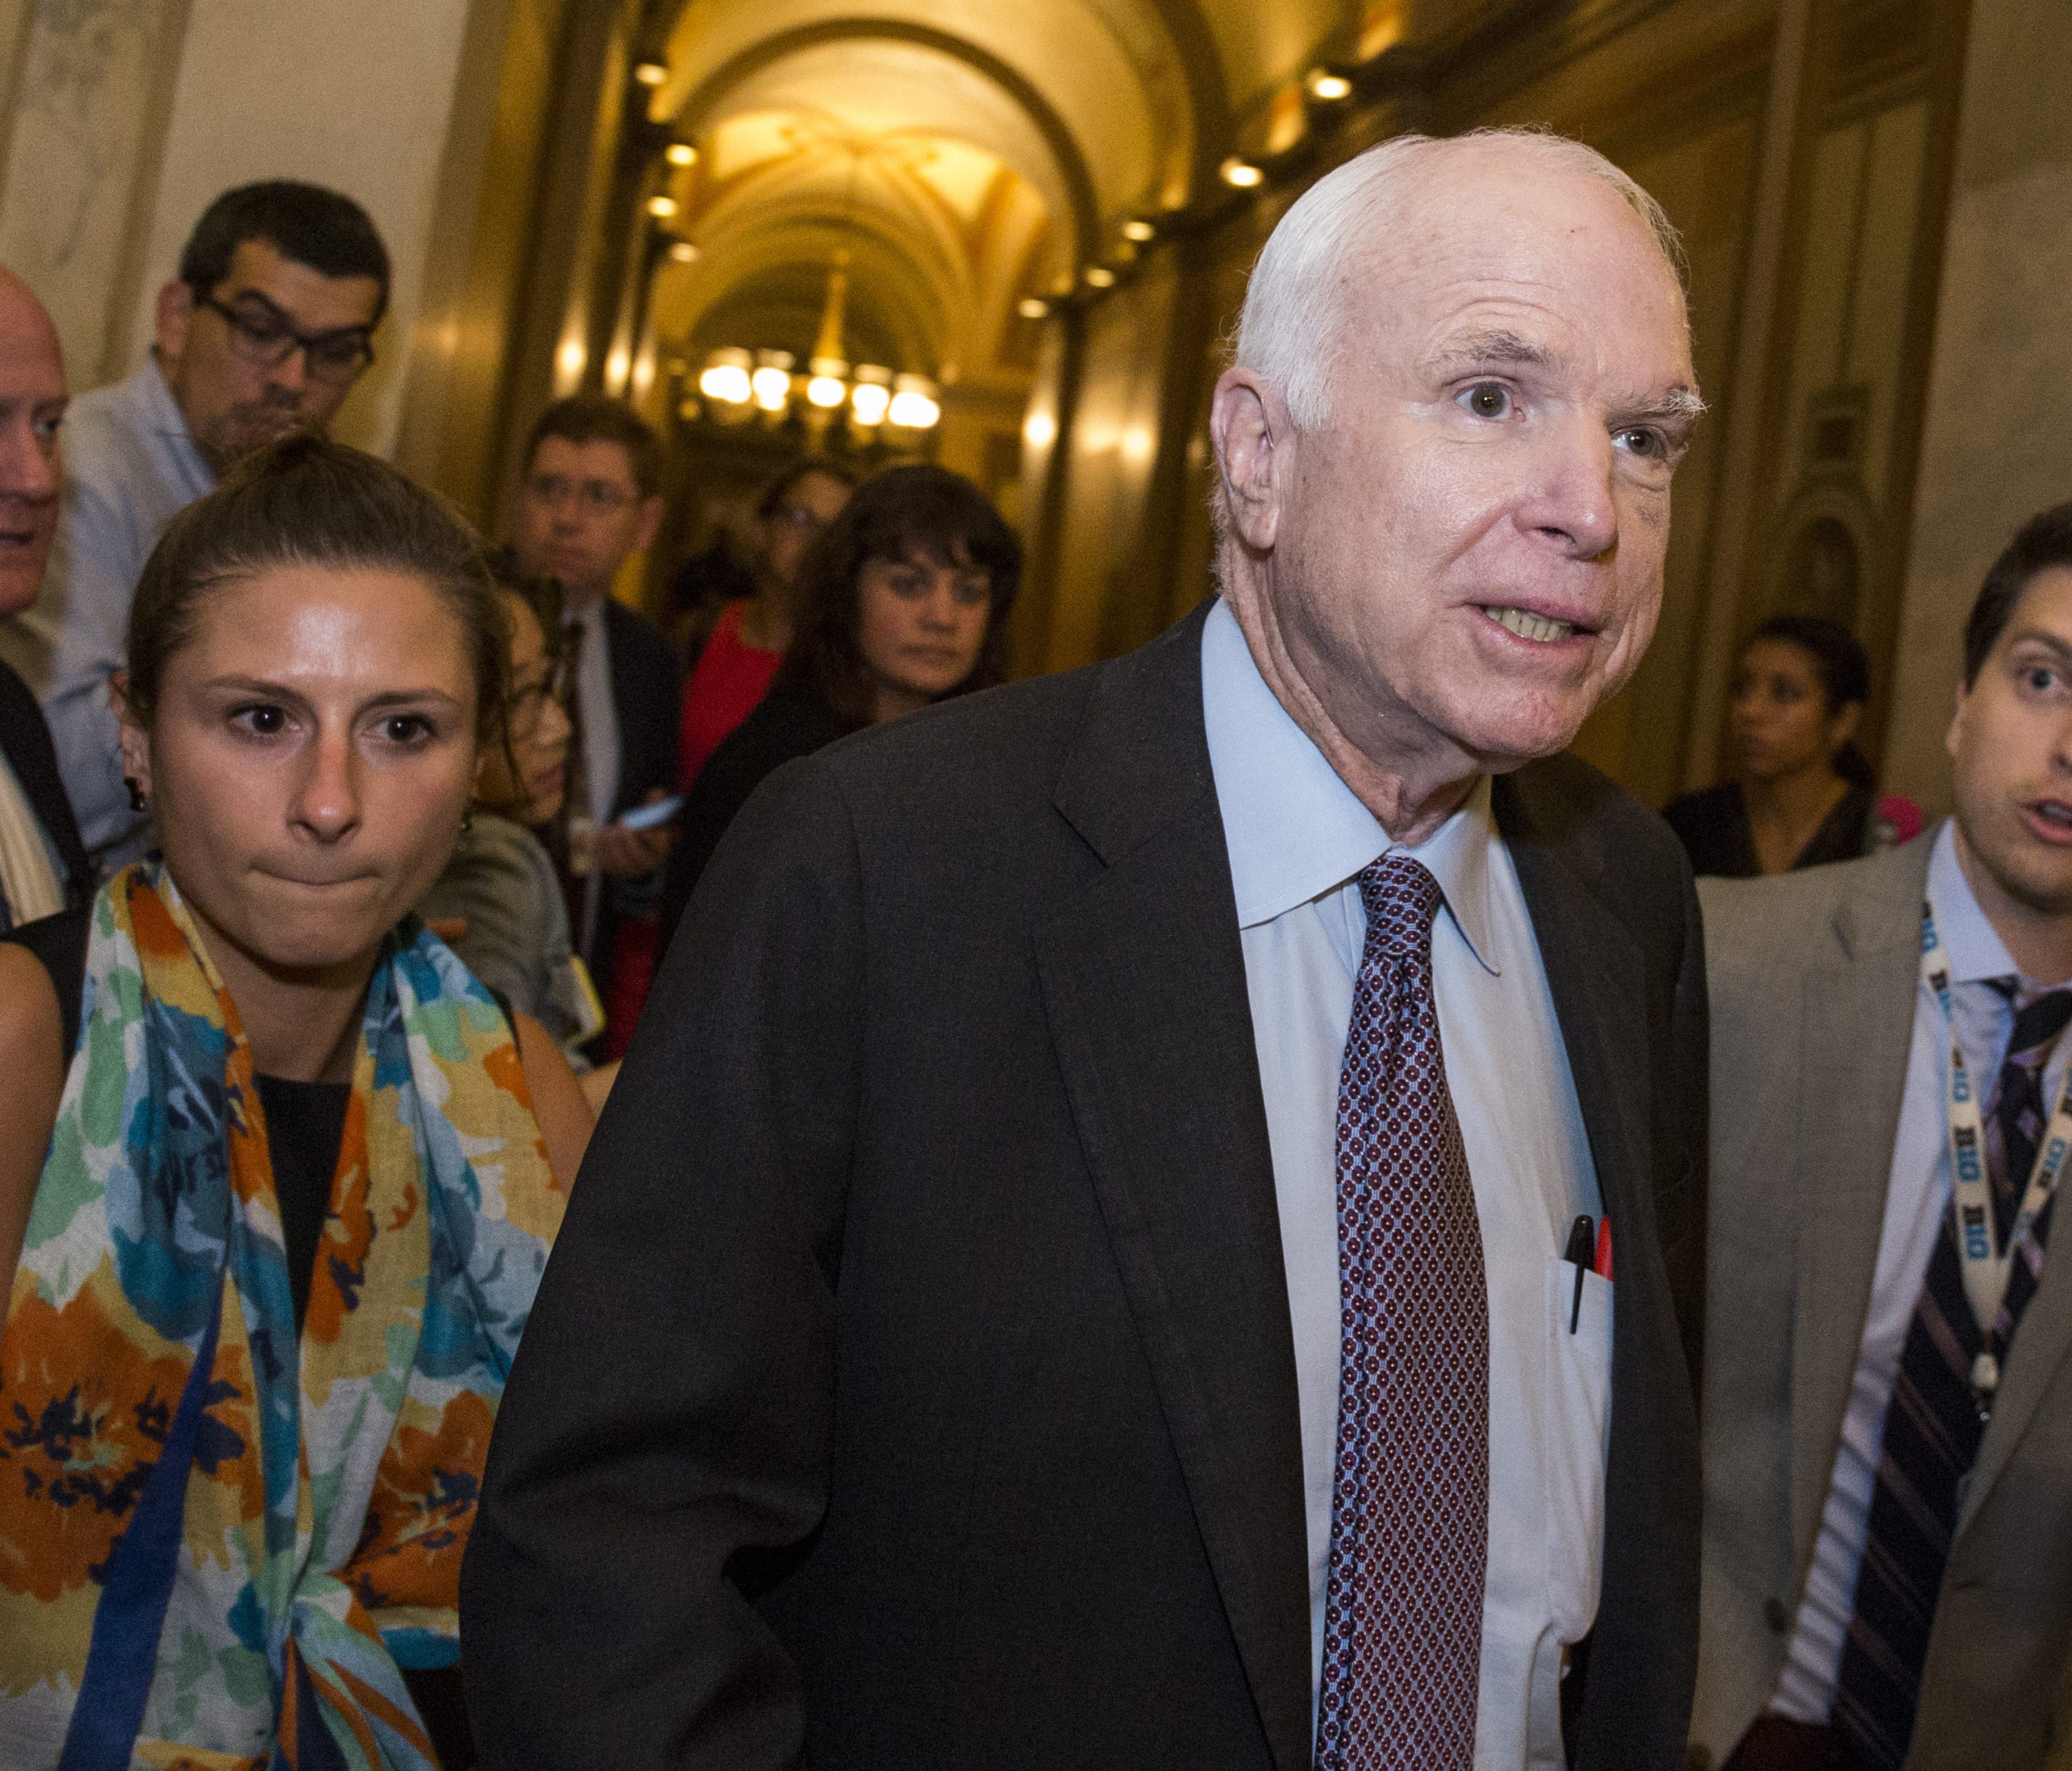 Sen. John McCain is pictured leaving the Senate Chamber after the Senate narrowly defeated a bill early Friday that would have repealed limited portions of the Affordable Care Act.